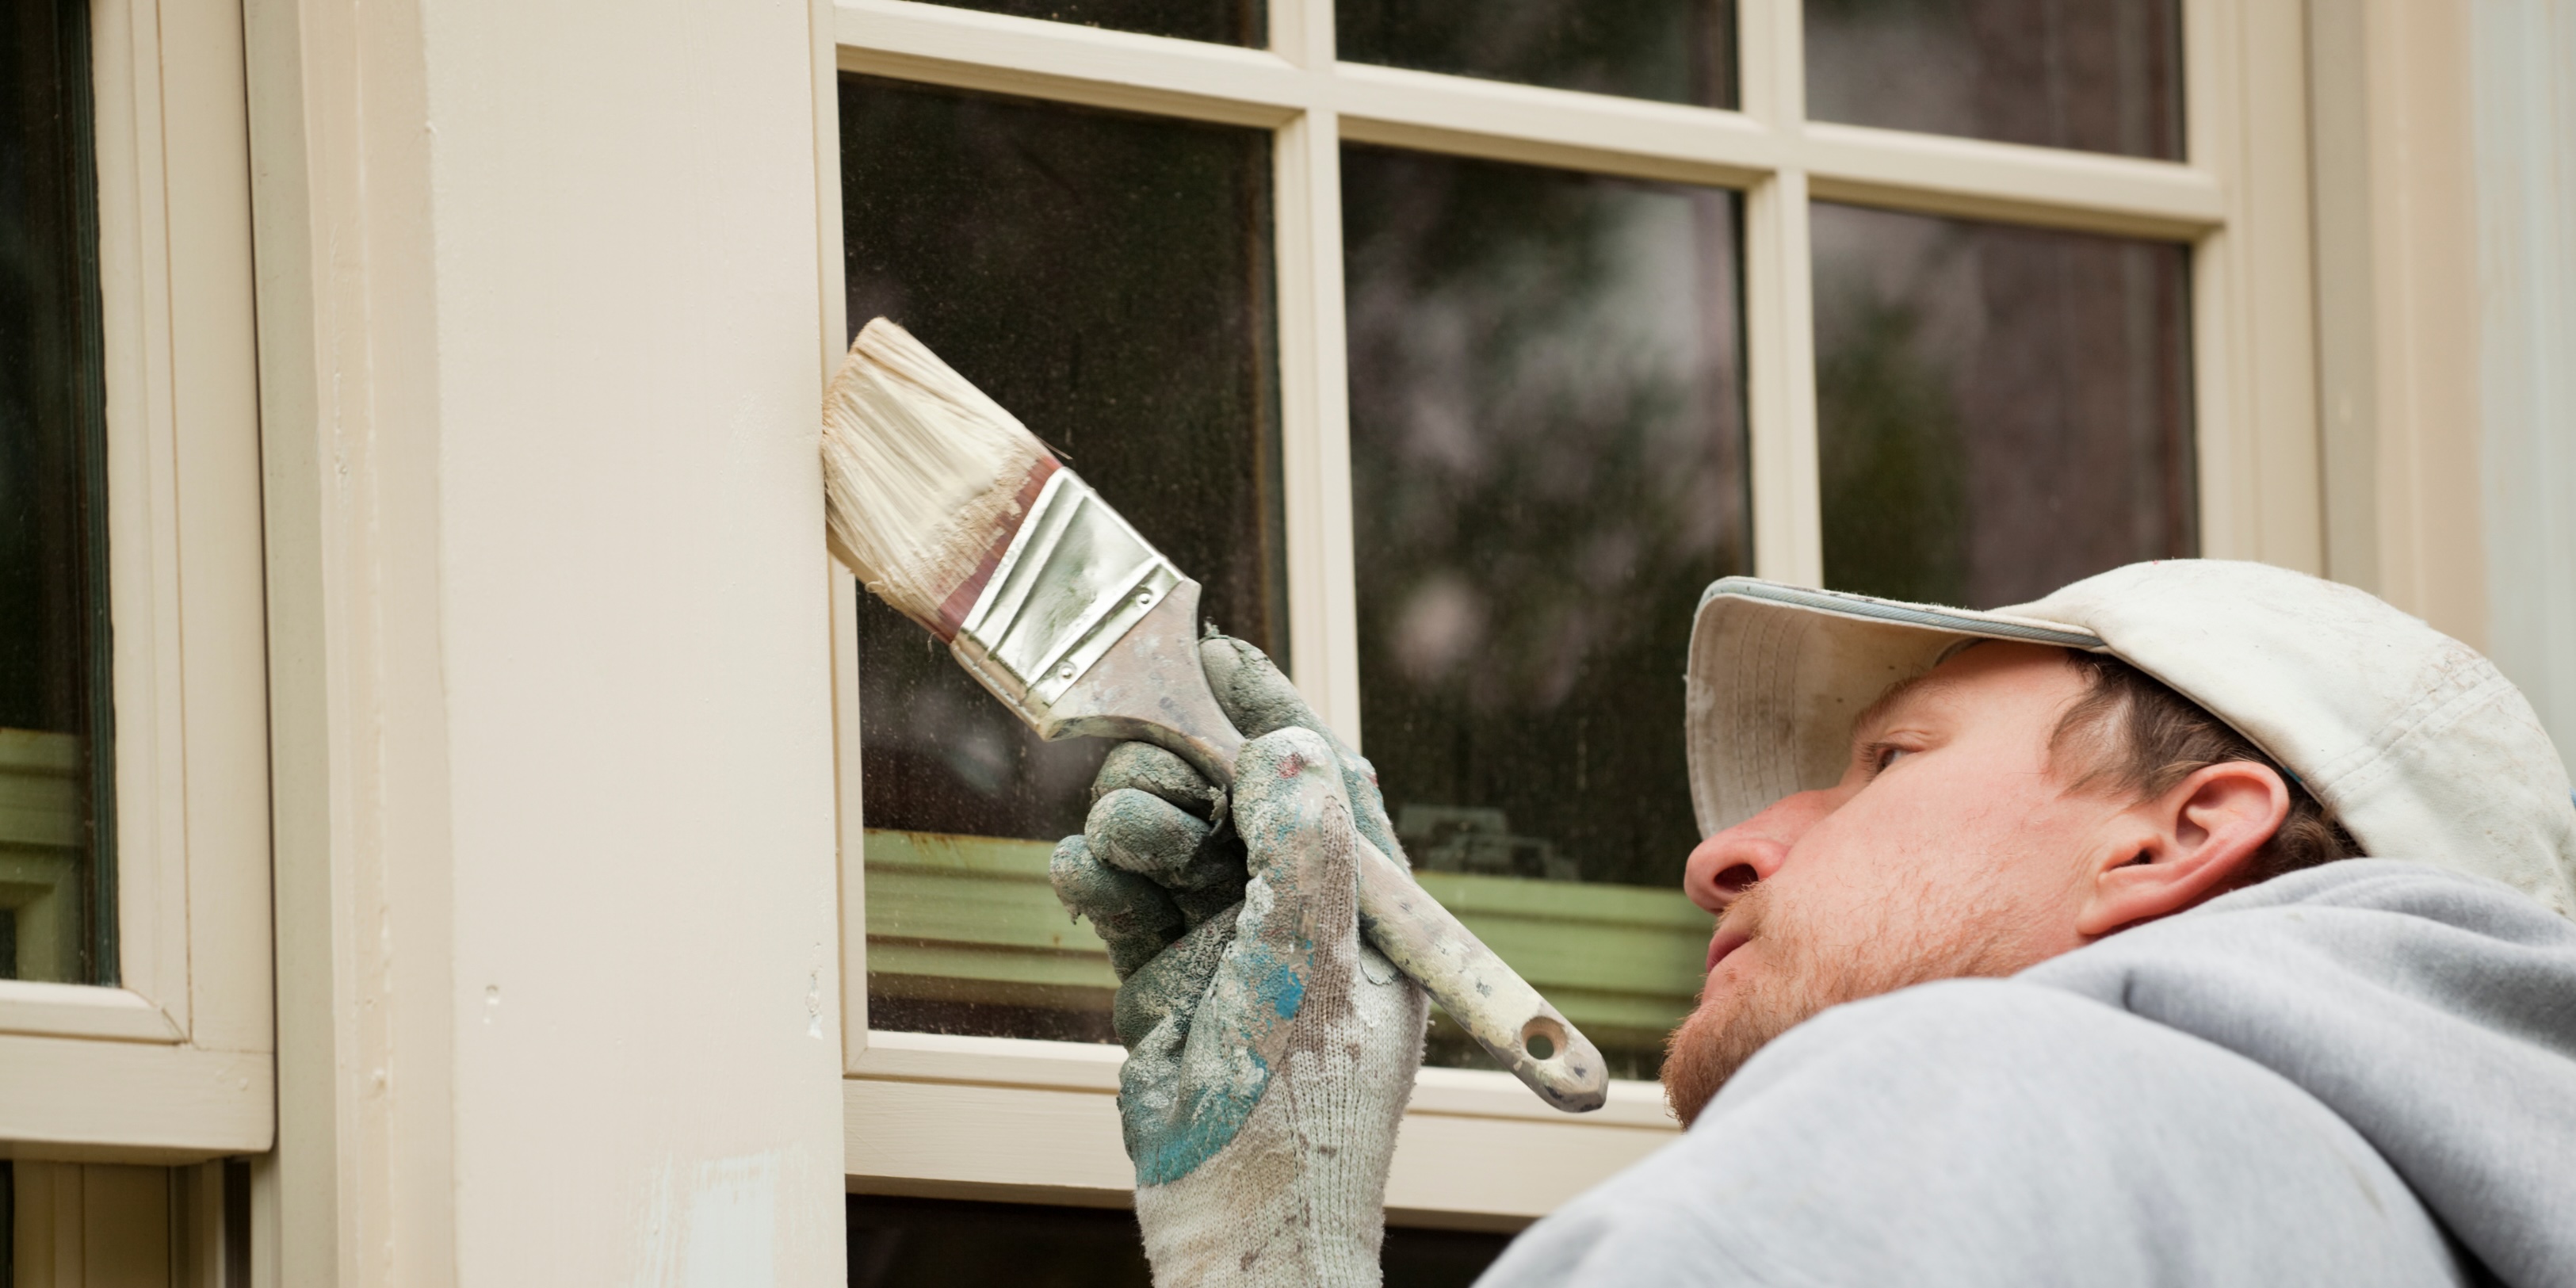 Regular inspection and touch-up of house exterior painted with ECOS Paints